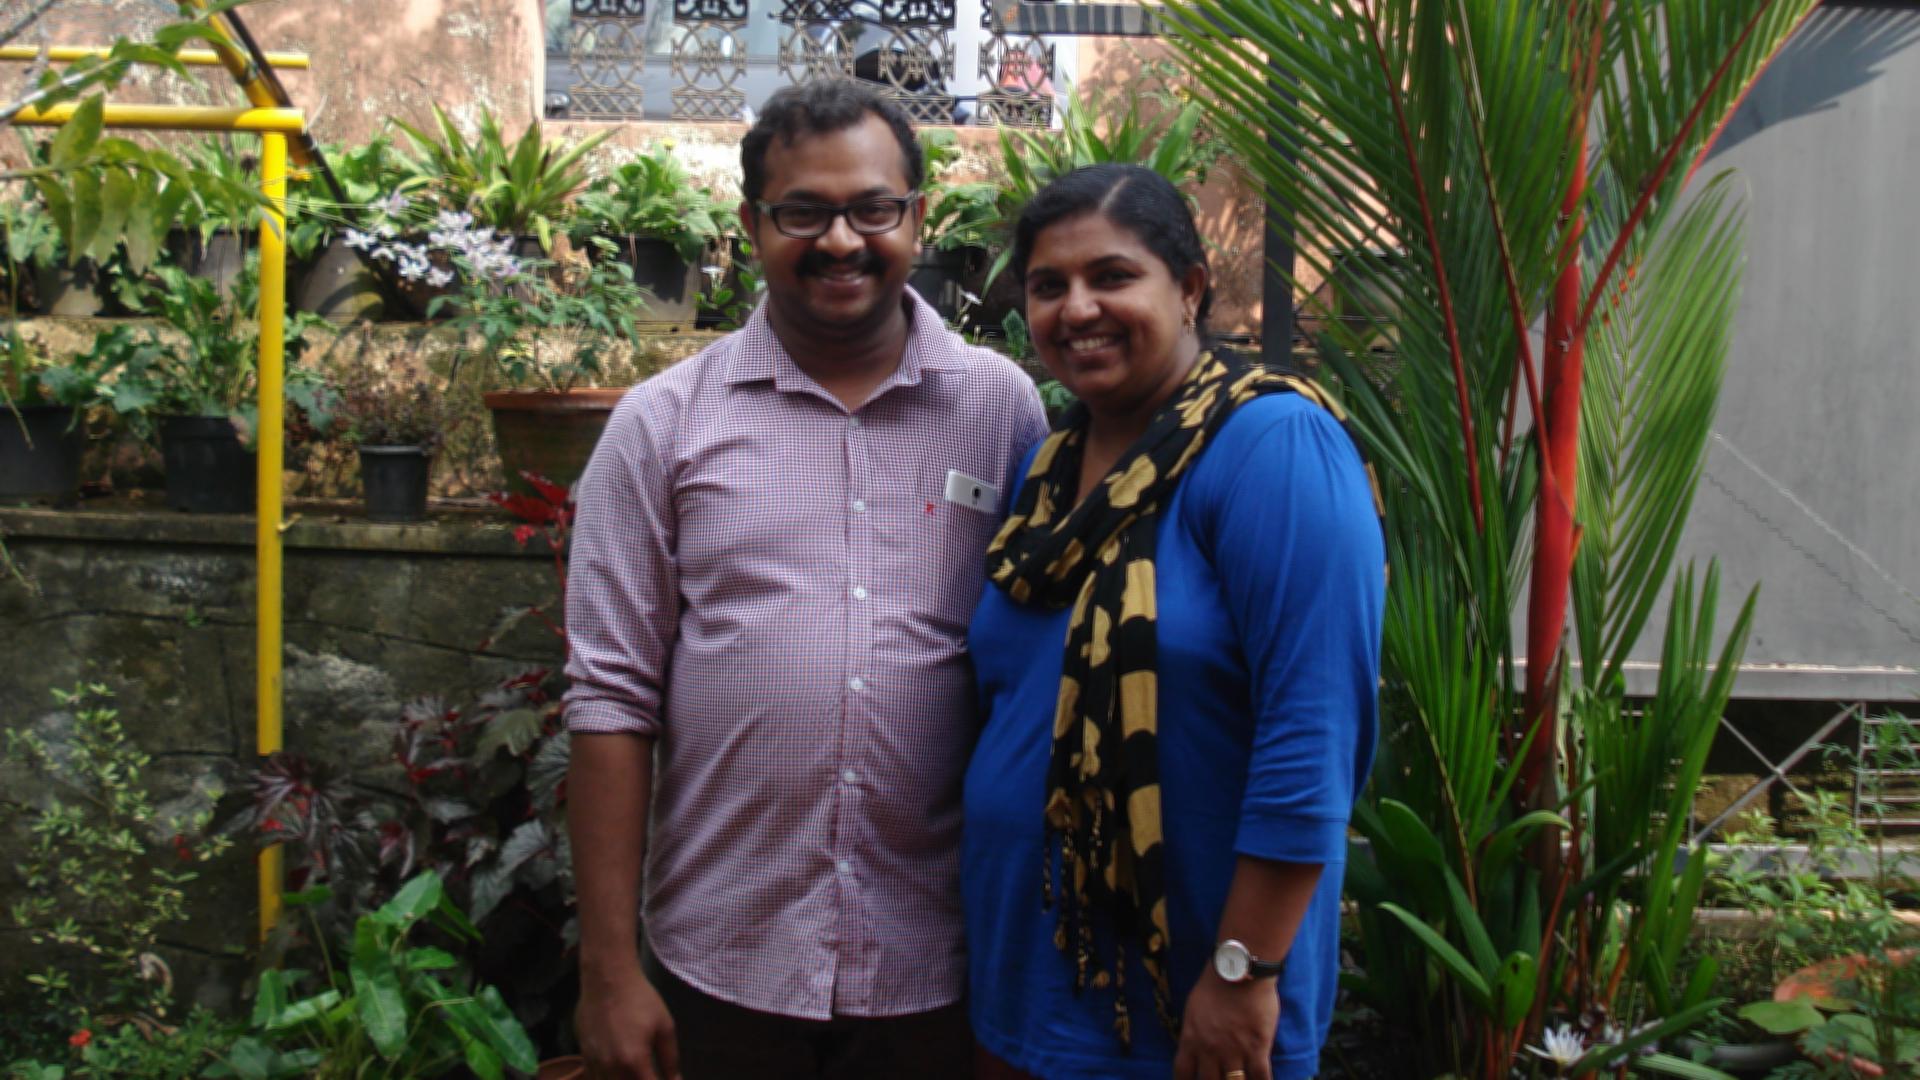 Sujitha (right) and her husband Manu (left) stand in the center of the frame in a portrait photograph.